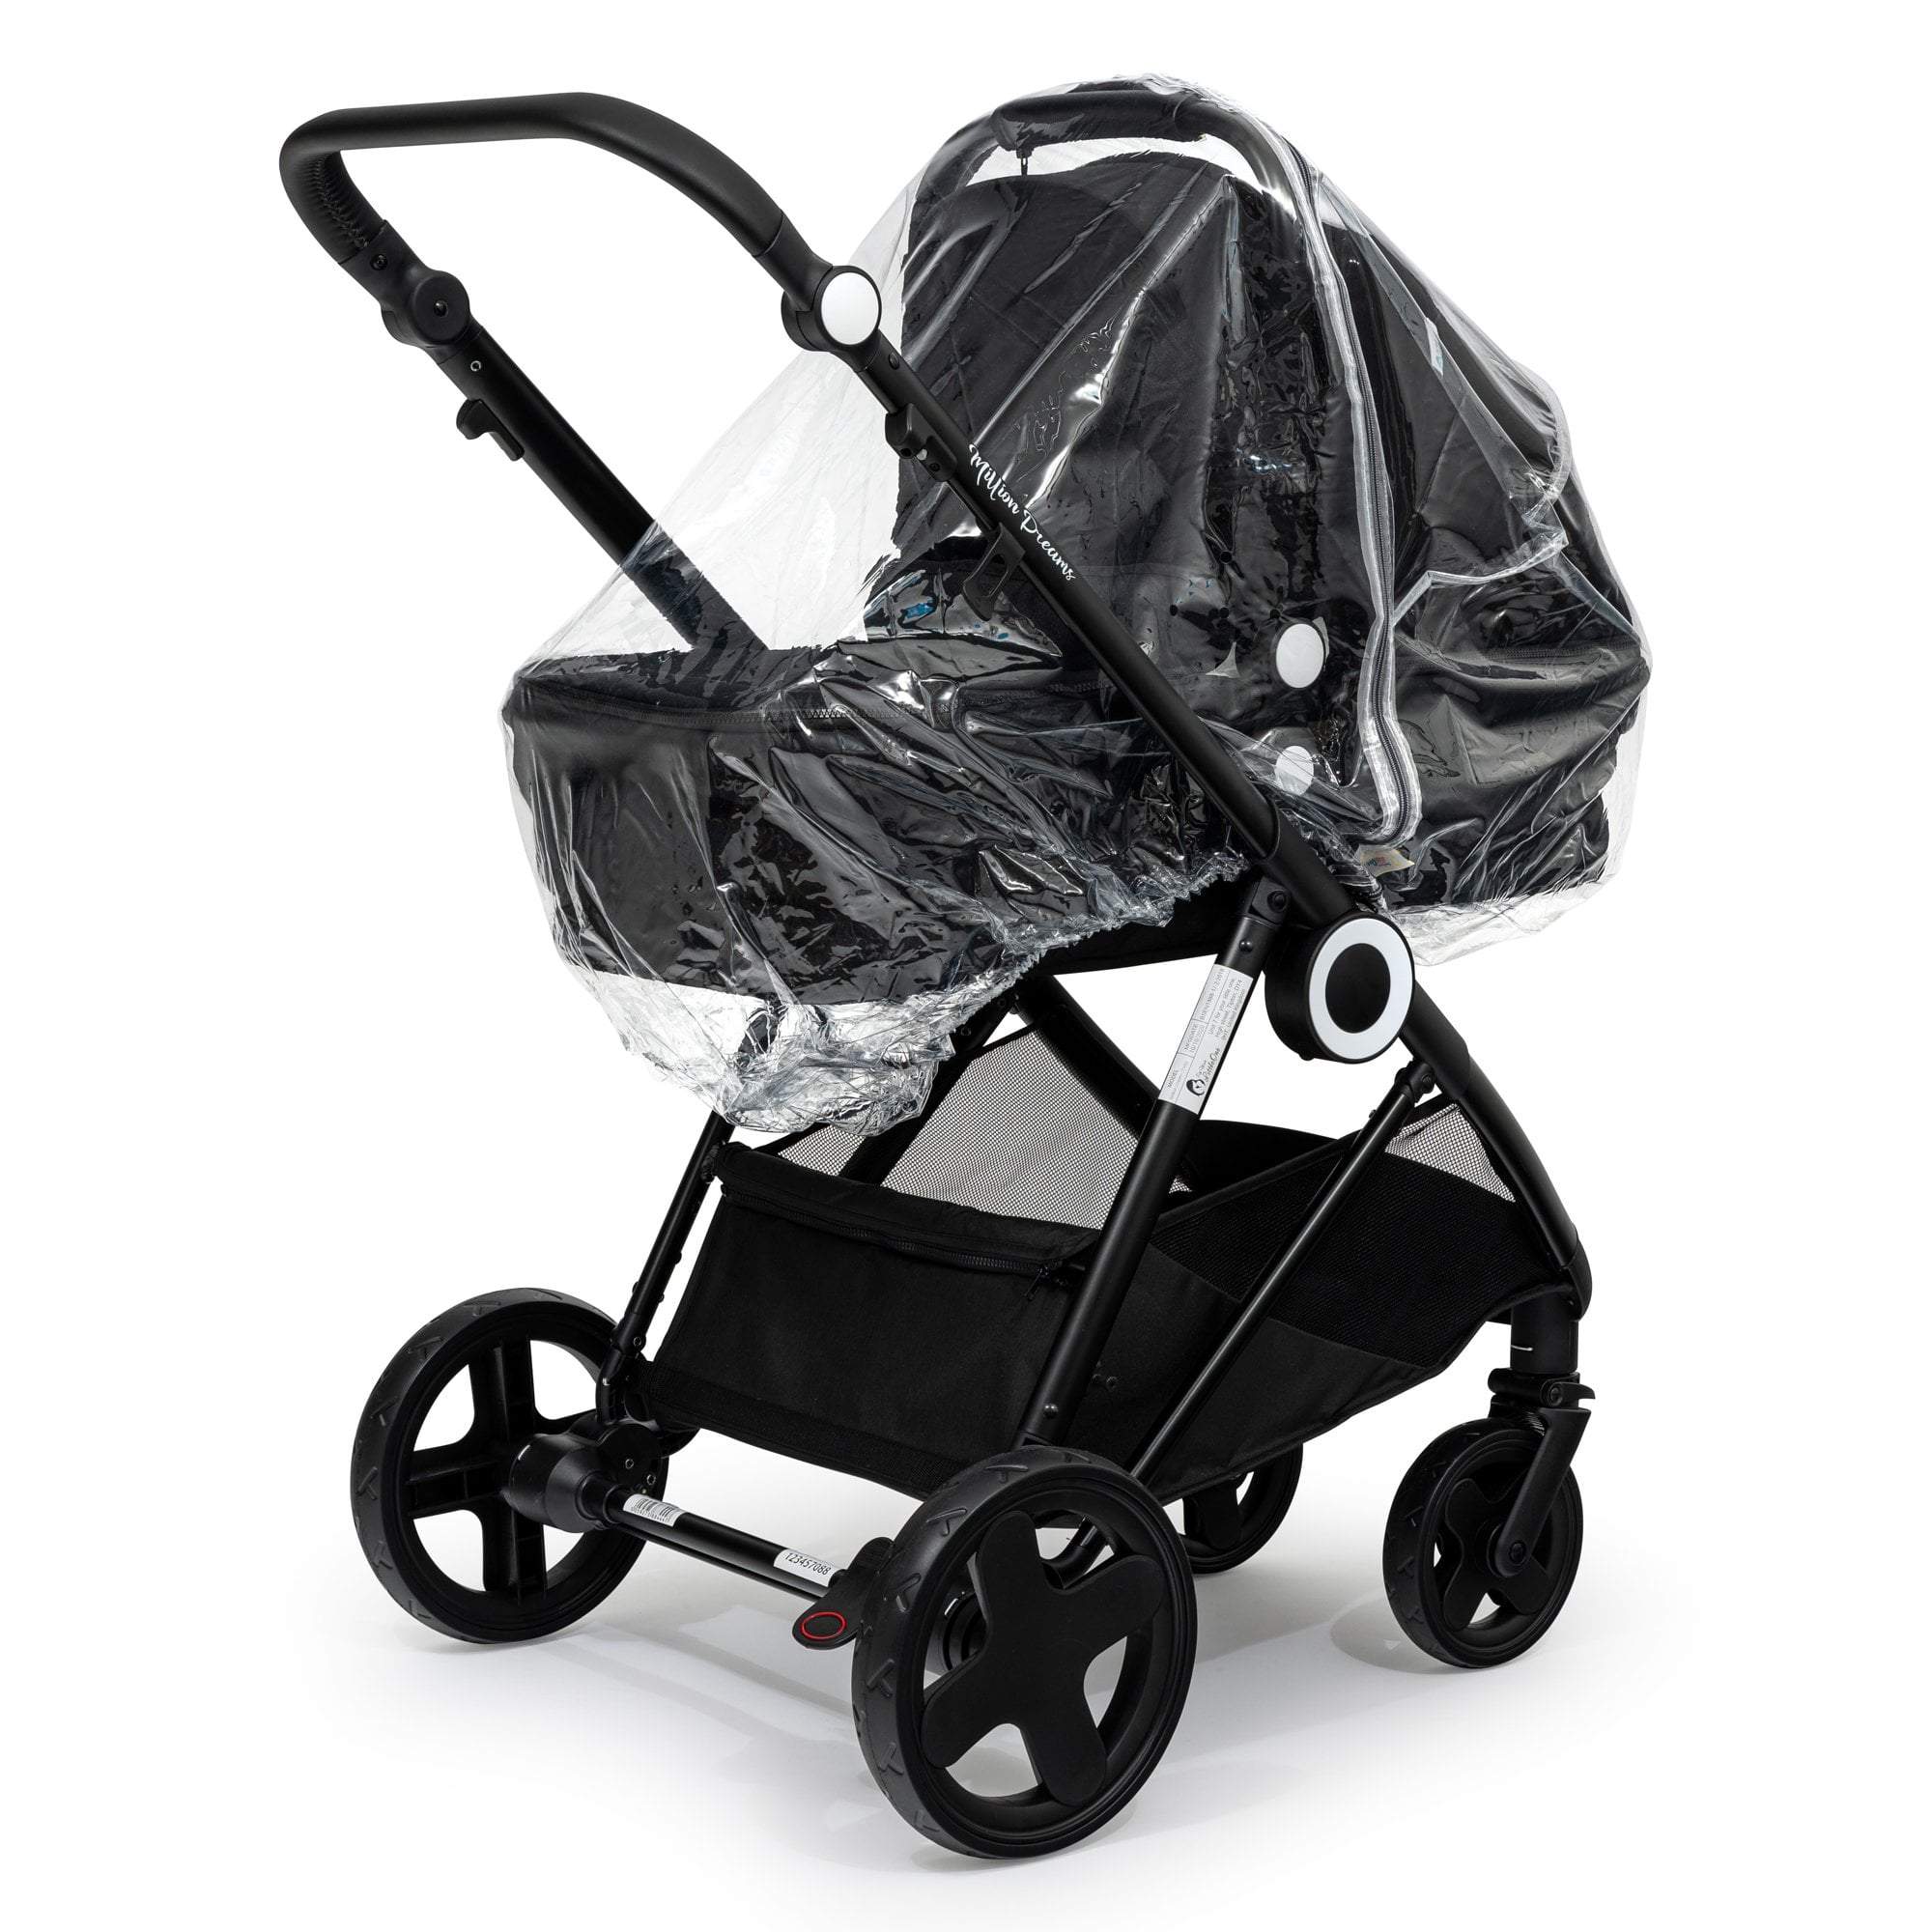 Carrycot Raincover Compatible With Joolz - Fits All Models - For Your Little One